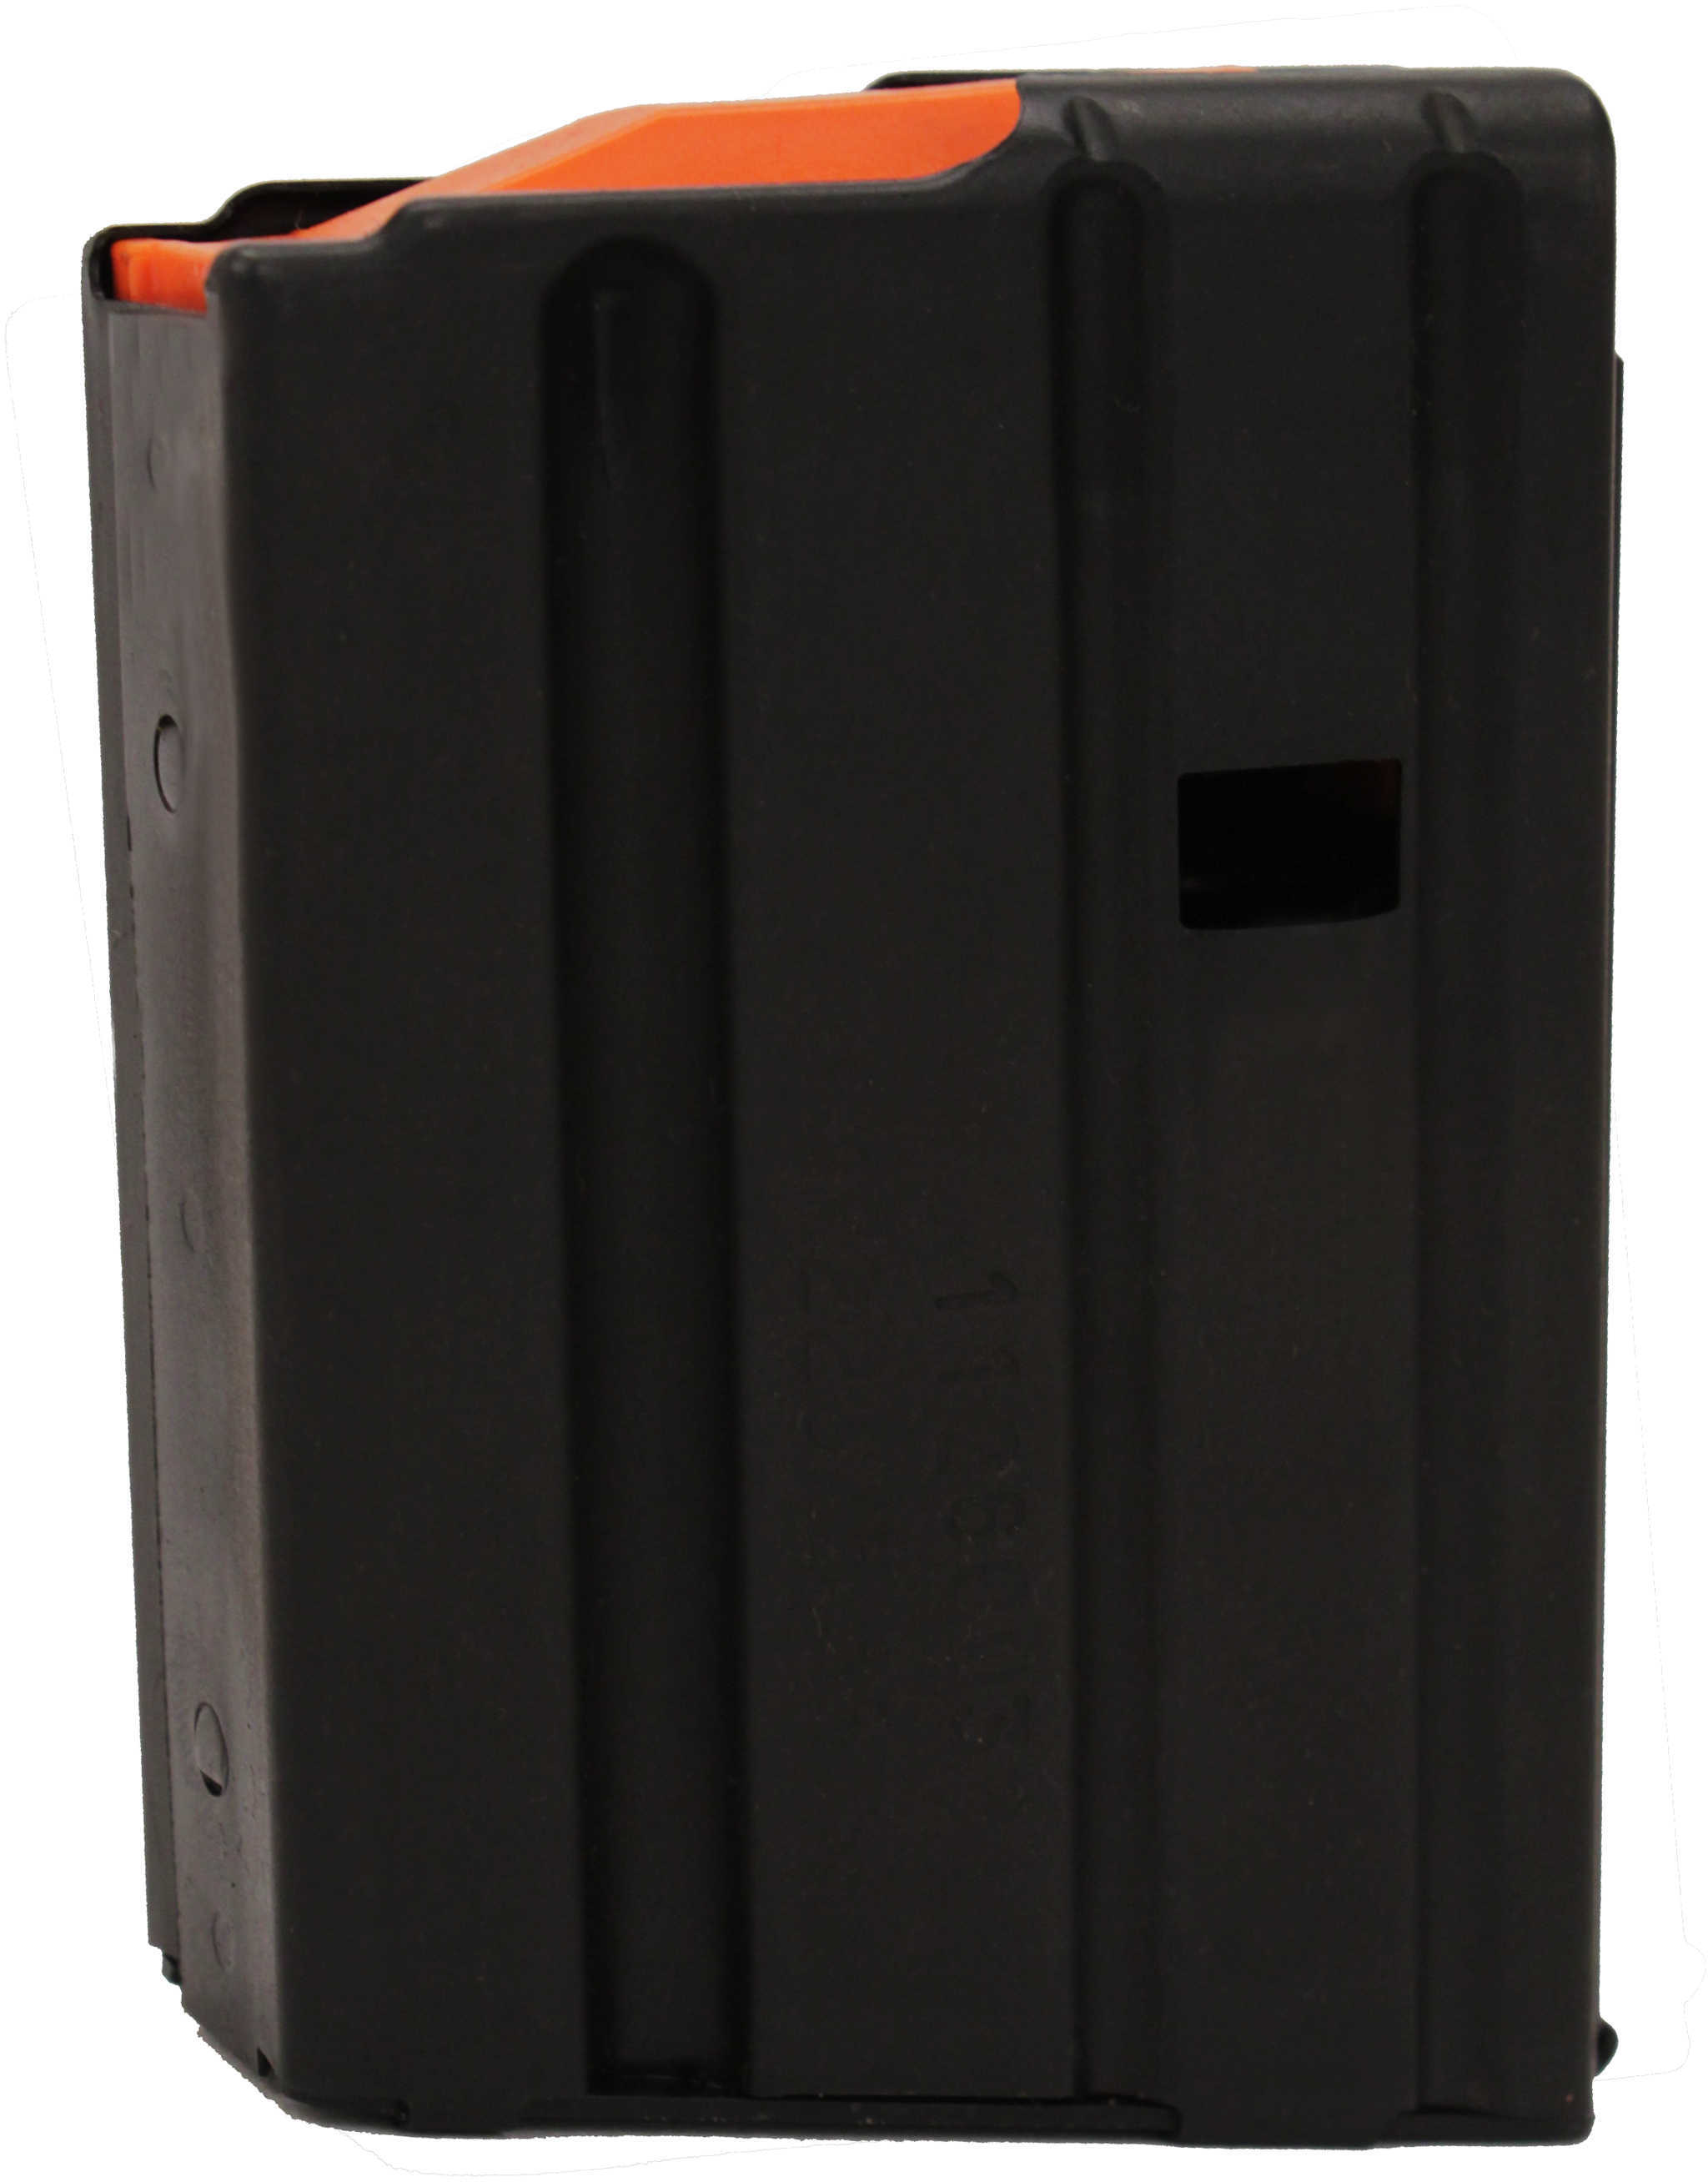 DURAMAG By C-Products Defense AR-15 Magazine .223/5.56 NATO 10 Rounds Stainless Steel Black